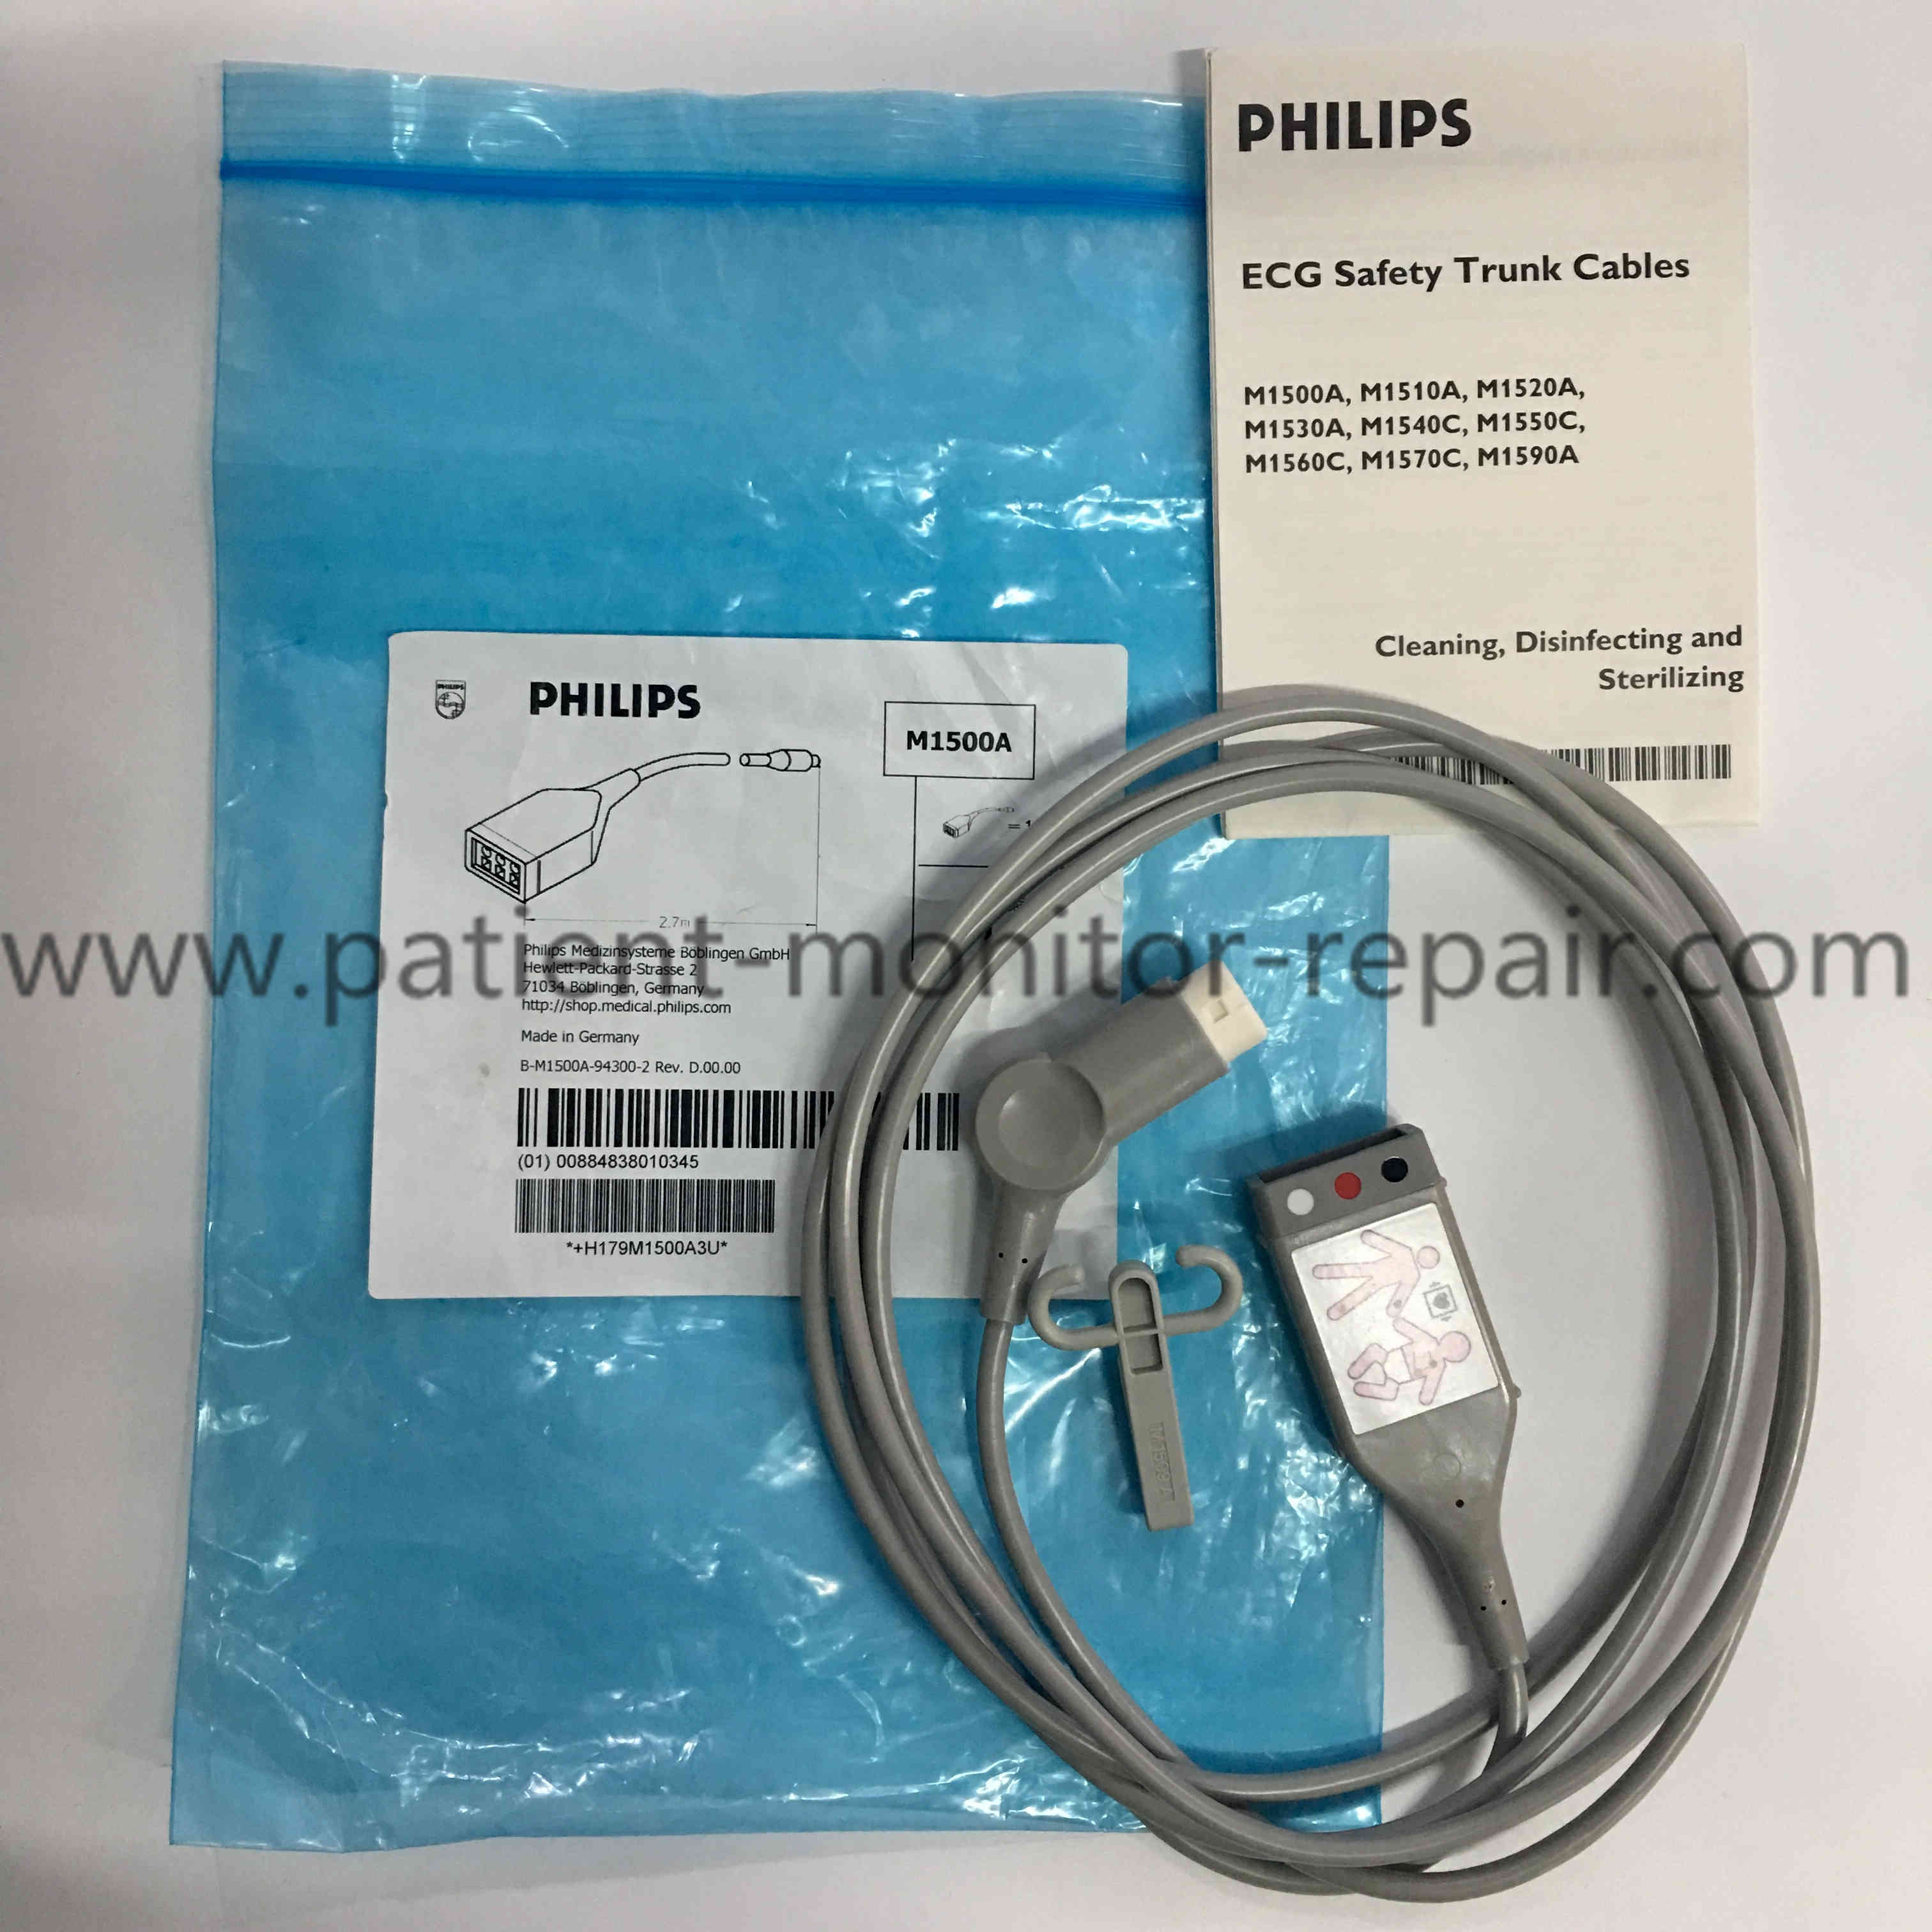 Philips ECG Safety 3-Lead Trunk Cable 12-Pin M1500A REF 989803103811 